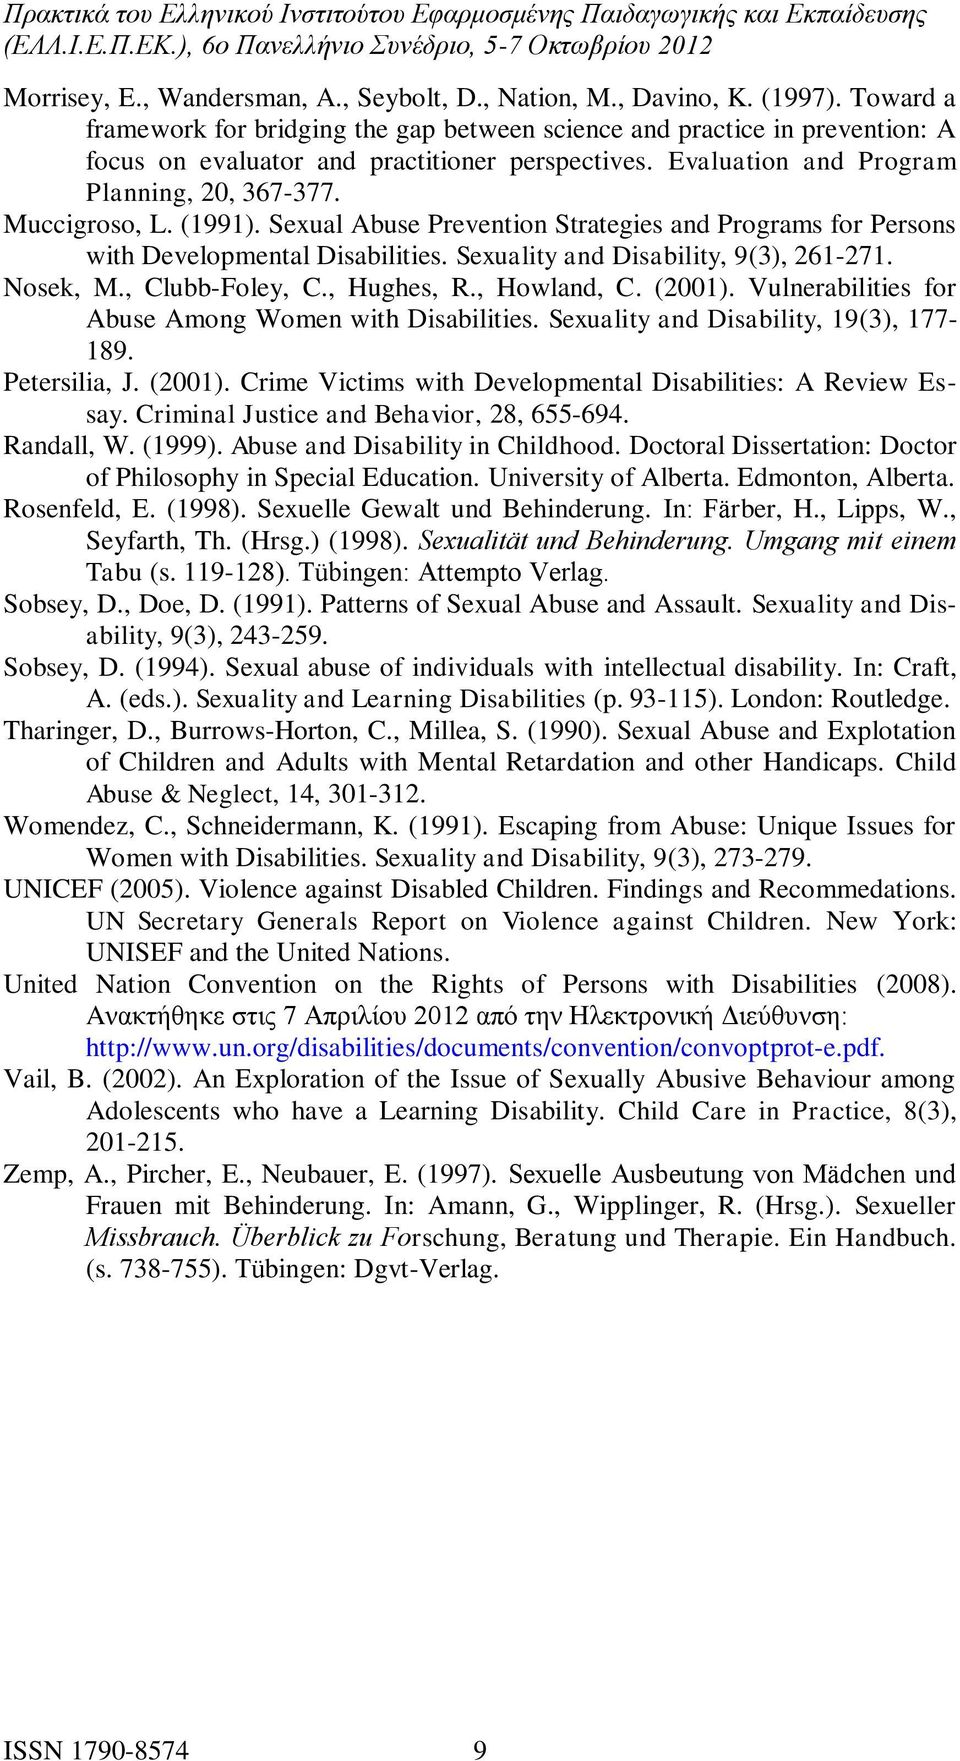 (1991). Sexual Abuse Prevention Strategies and Programs for Persons with Developmental Disabilities. Sexuality and Disability, 9(3), 261-271. Nosek, M., Clubb-Foley, C., Hughes, R., Howland, C.